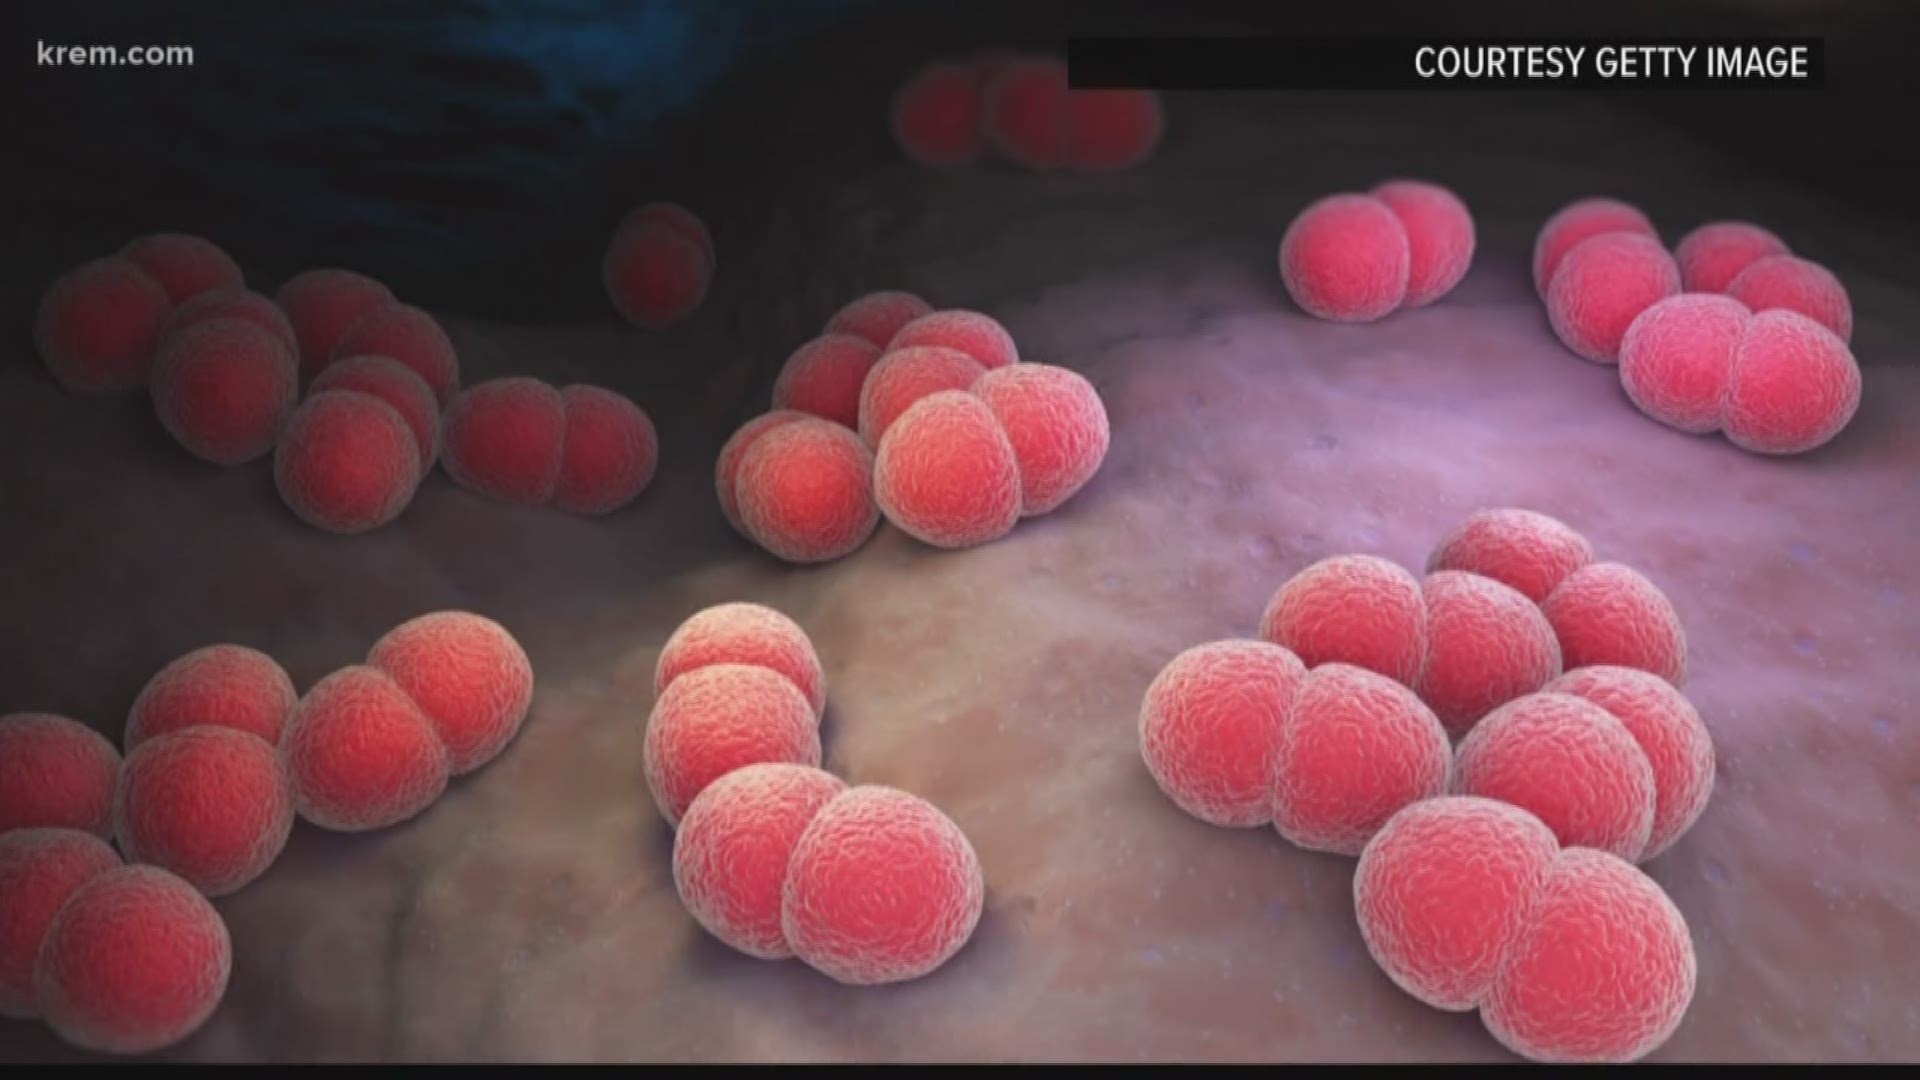 Meningococcal disease is a contagious infection that may cause infection of the covering of the spinal cord, bacteria in the blood or pneumonia, health officials said.